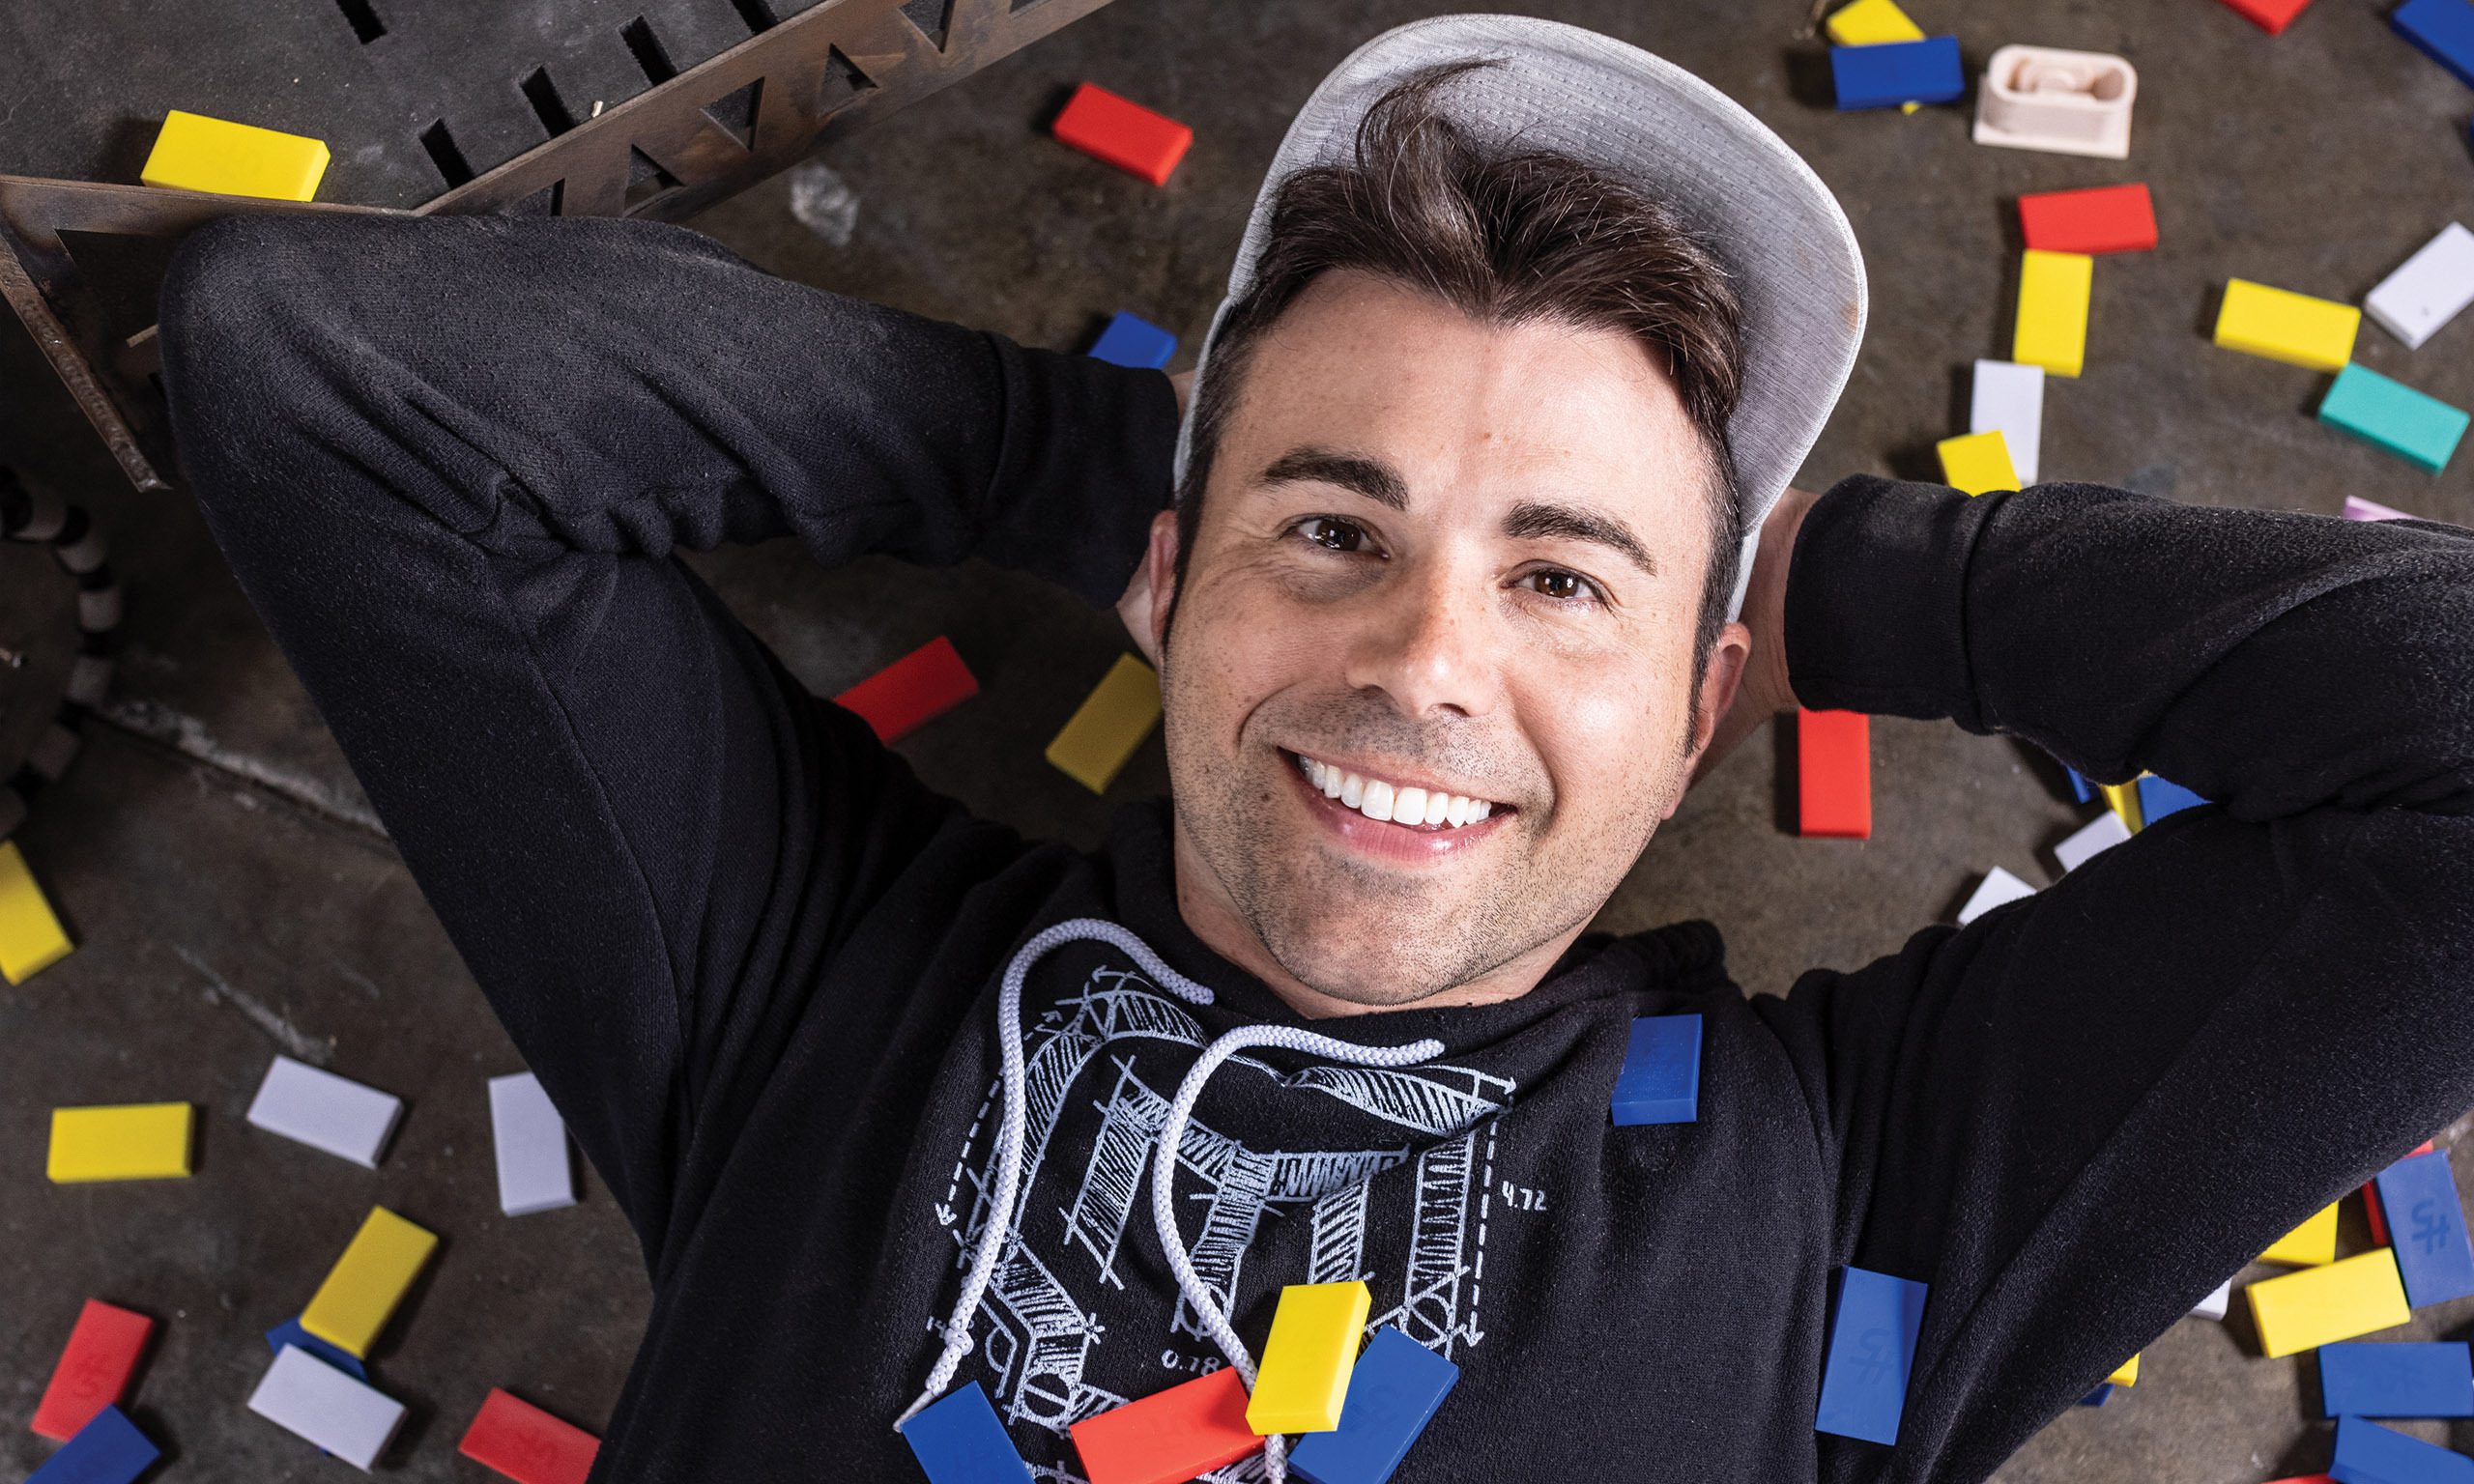 Youtuber Mark Rober laying down on a floor full of yellow, red, white, and blue dominos.